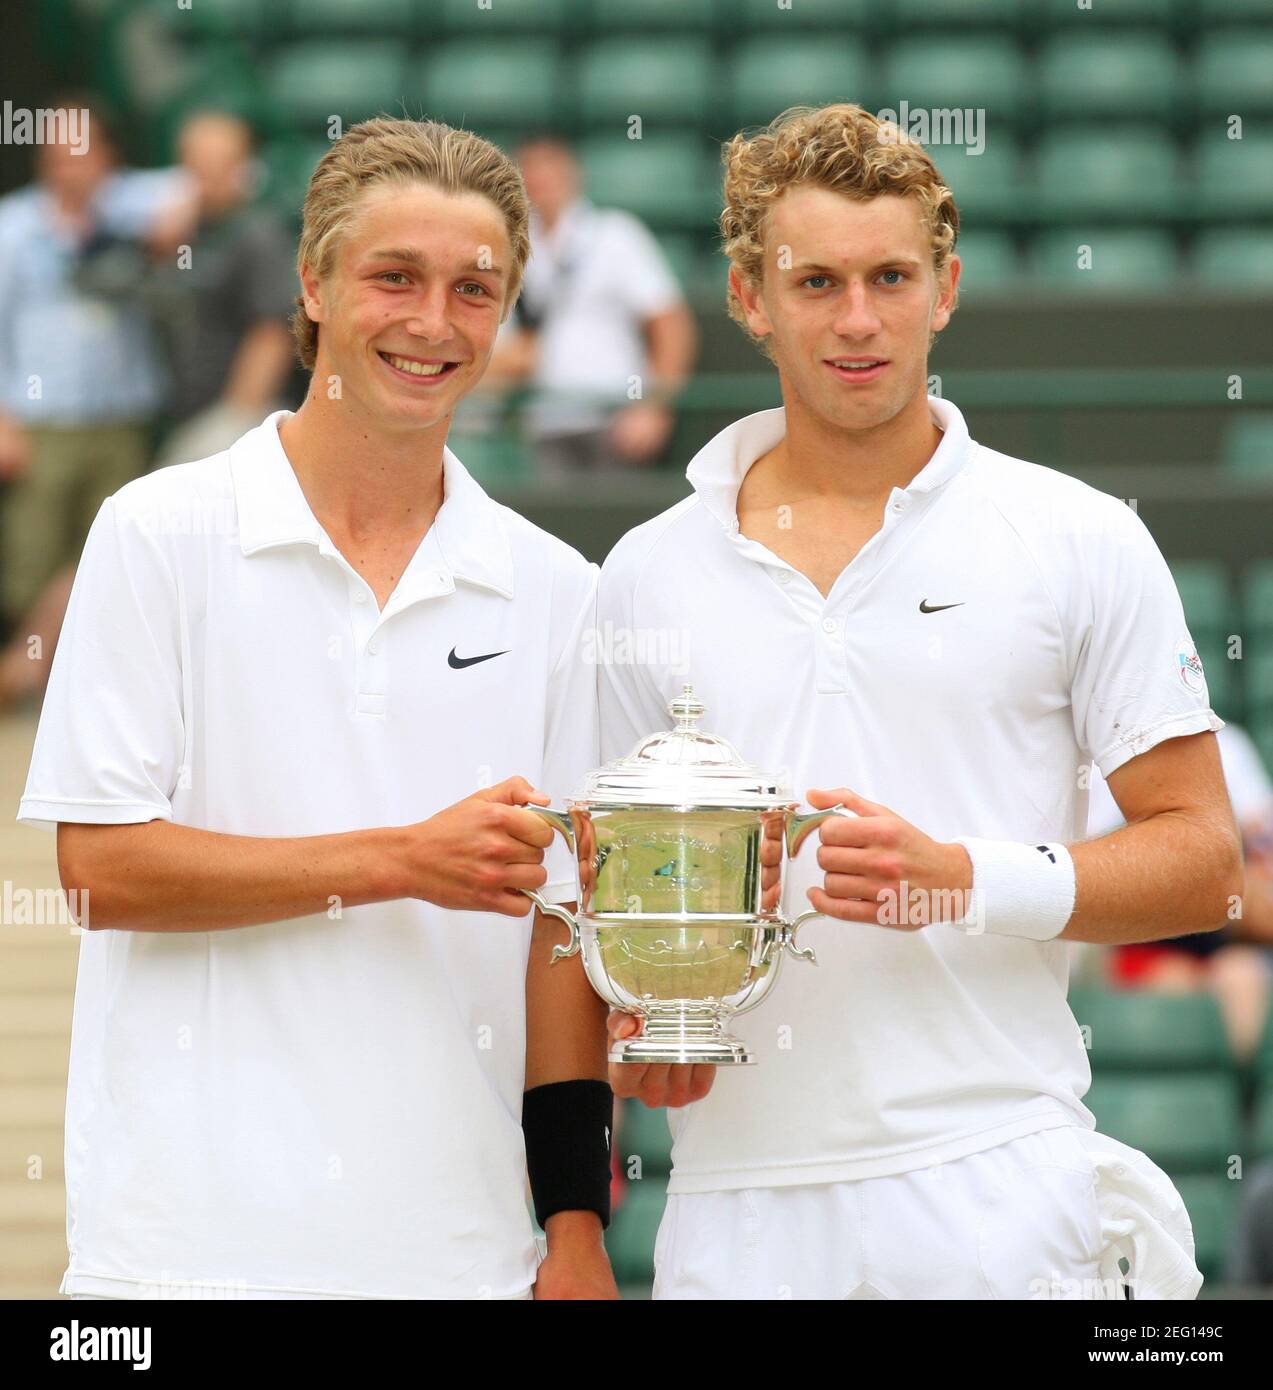 Tennis - Wimbledon - All England Lawn Tennis & Croquet Club, Wimbledon,  England - 4/7/10 Great Britain's Liam Broady and Tom Farquharson (R)  celebrate with the trophy after winning the Boy's Doubles